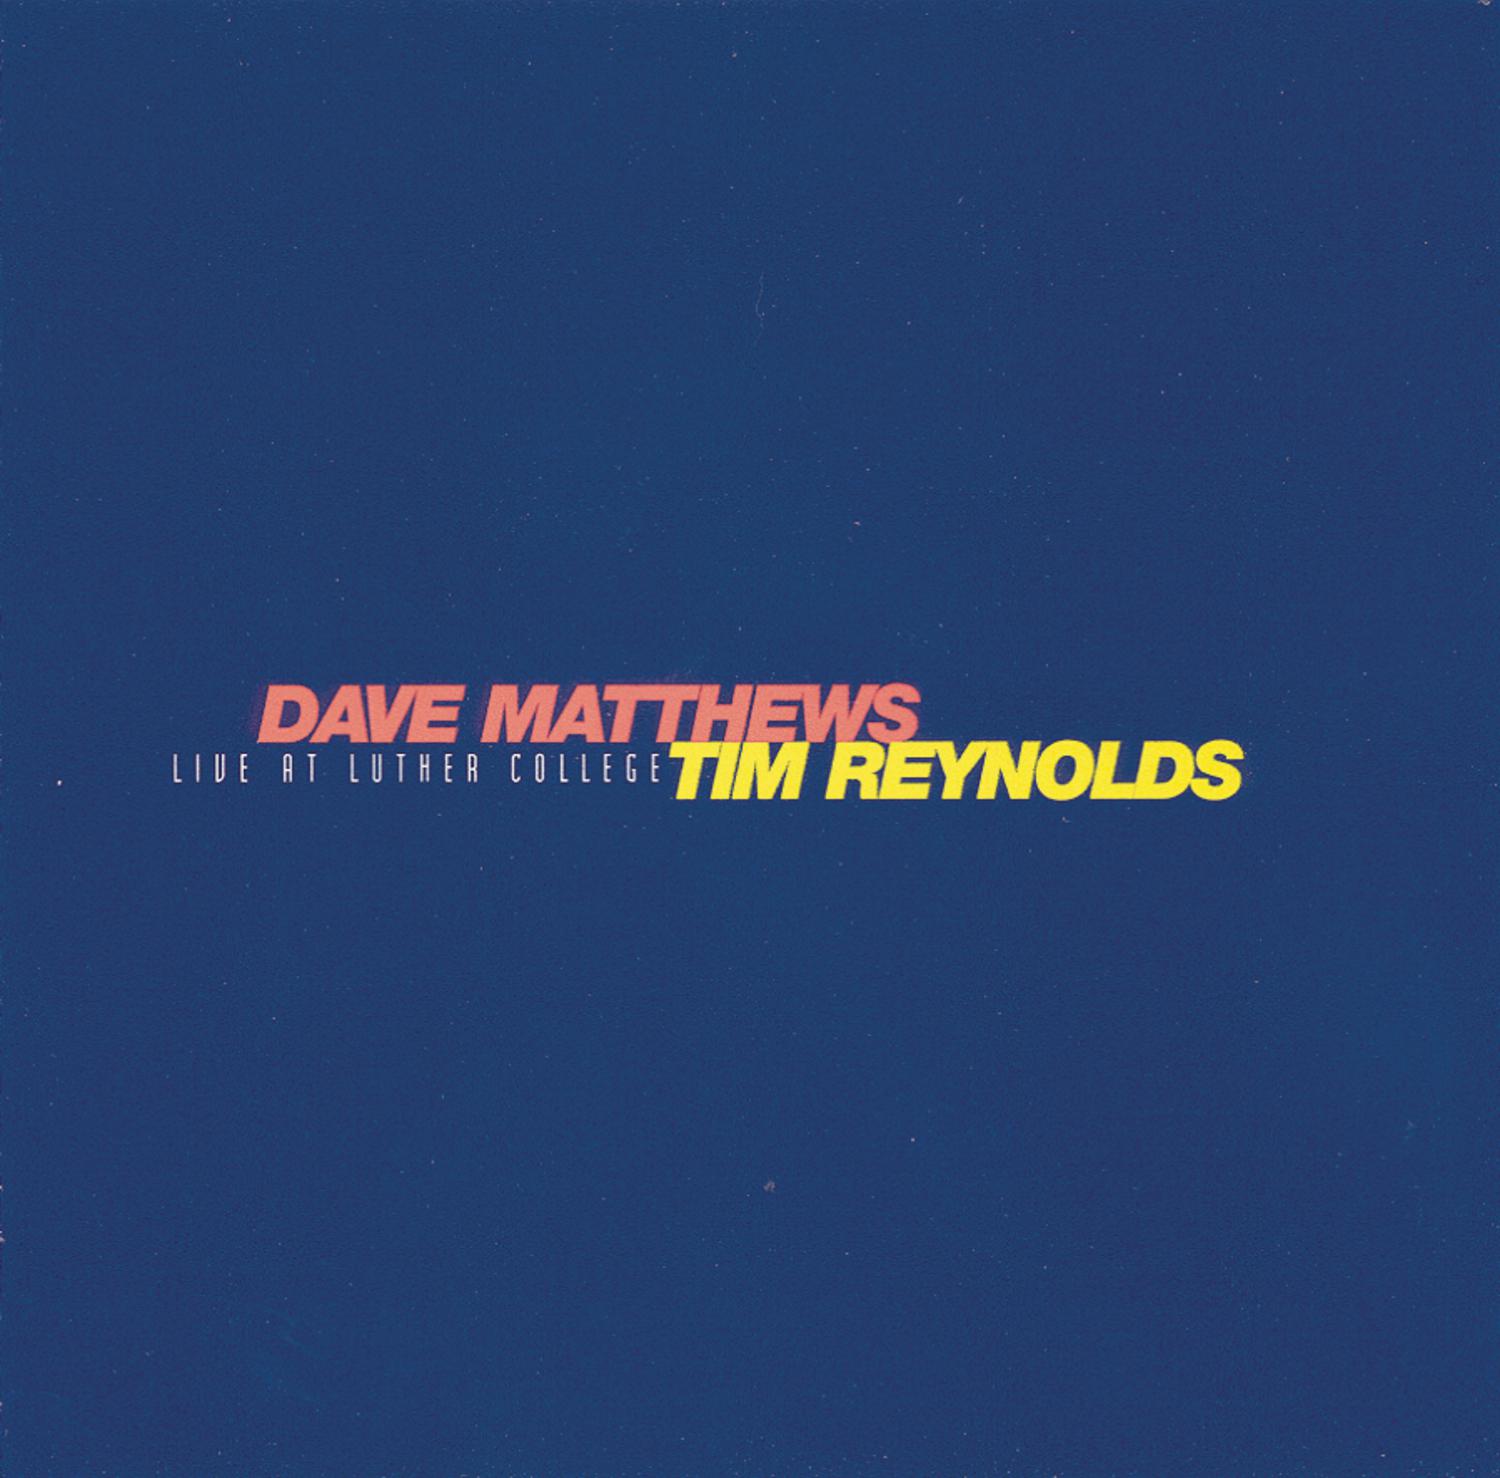 Dave Matthews - #41 (Live at Luther College, Decorah, IA, 02.06.96)